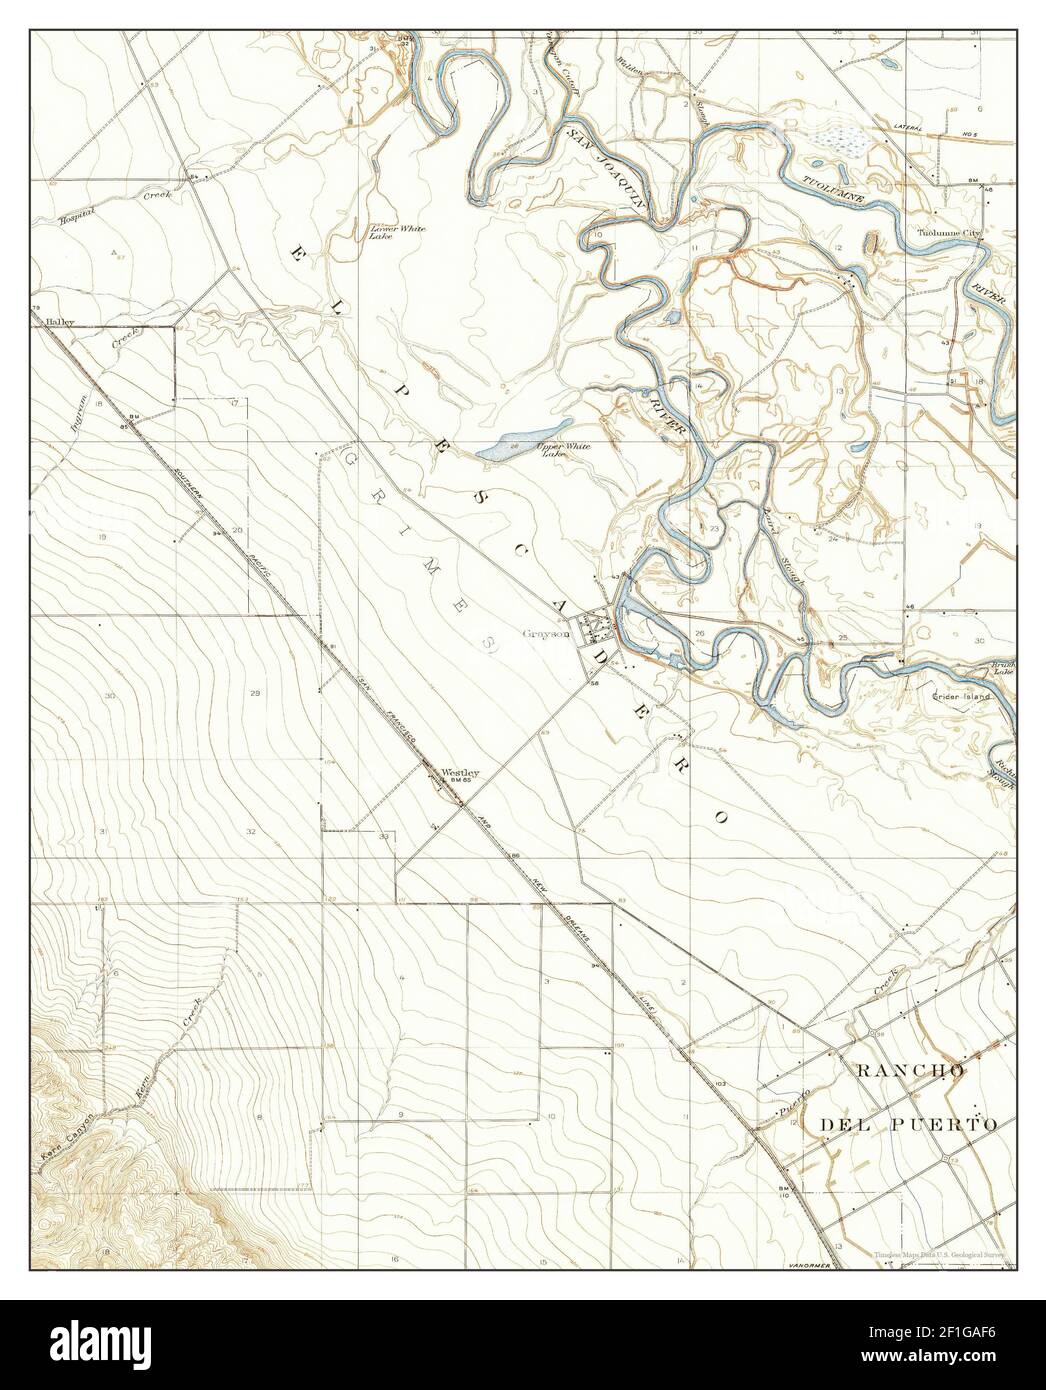 Westley, California, map 1915, 1:31680, United States of America by Timeless Maps, data U.S. Geological Survey Stock Photo